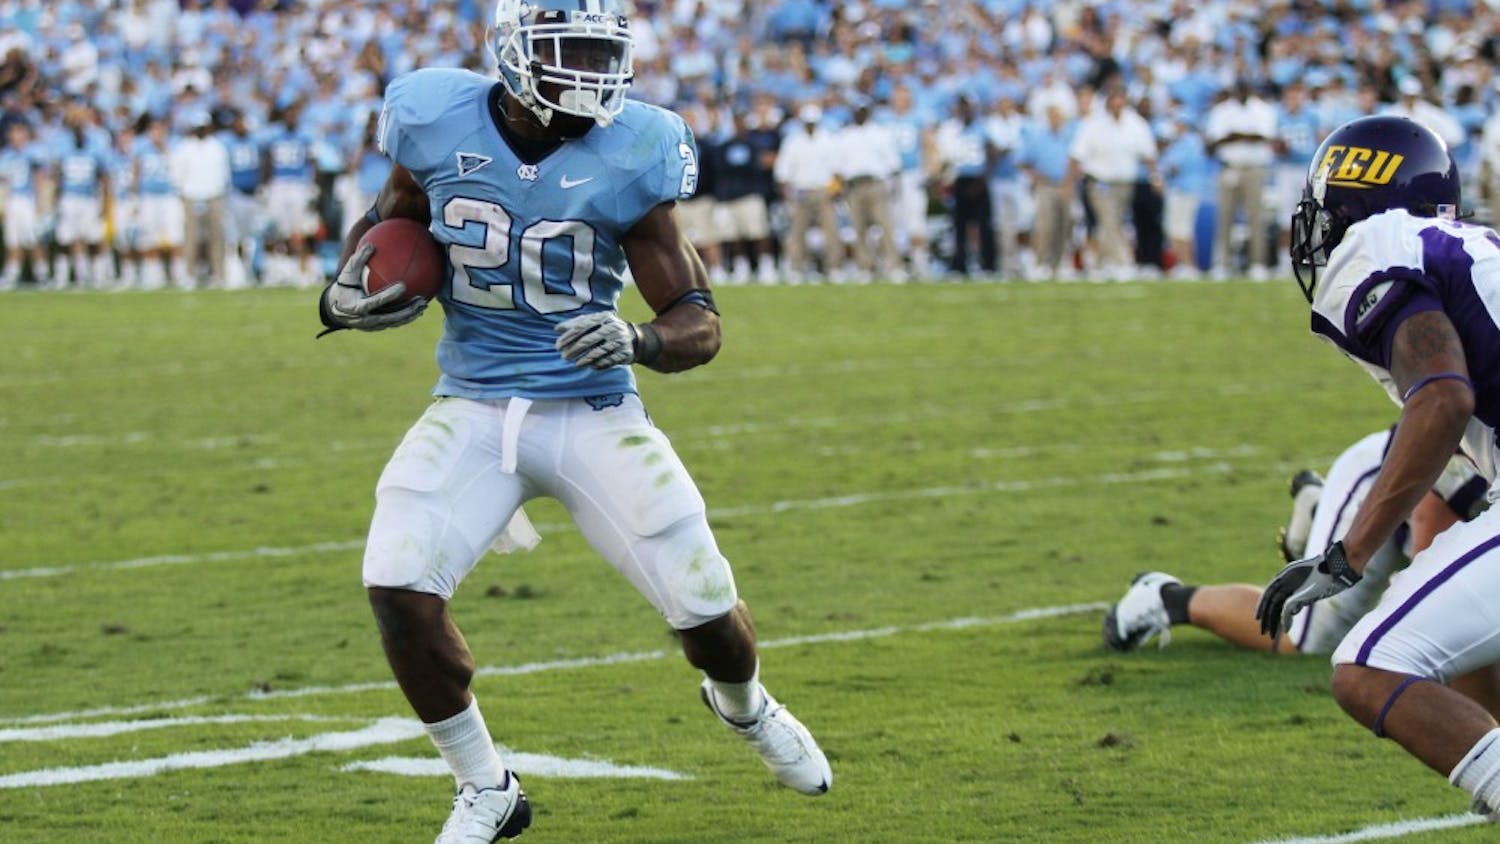 Tailback Sean Draughn ran for three touchdowns in UNC's 42-17 victory over East Carolina on Saturday.